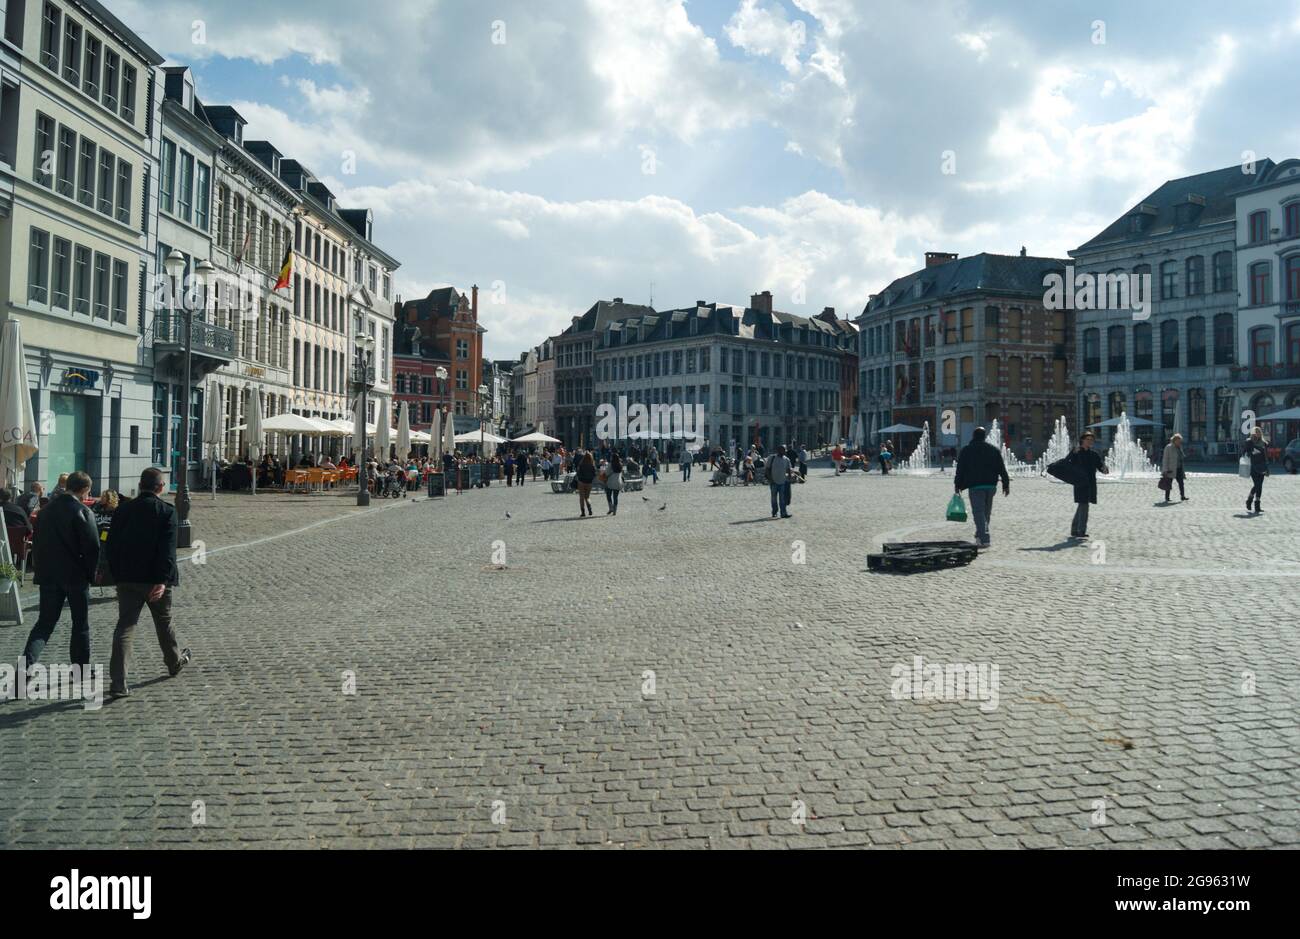 Mons / Belgium / May 7 2012 :  The town square in the heart of the old city.  Elegant  buildings surround the open, cobbled, space. People relax at pa Stock Photo